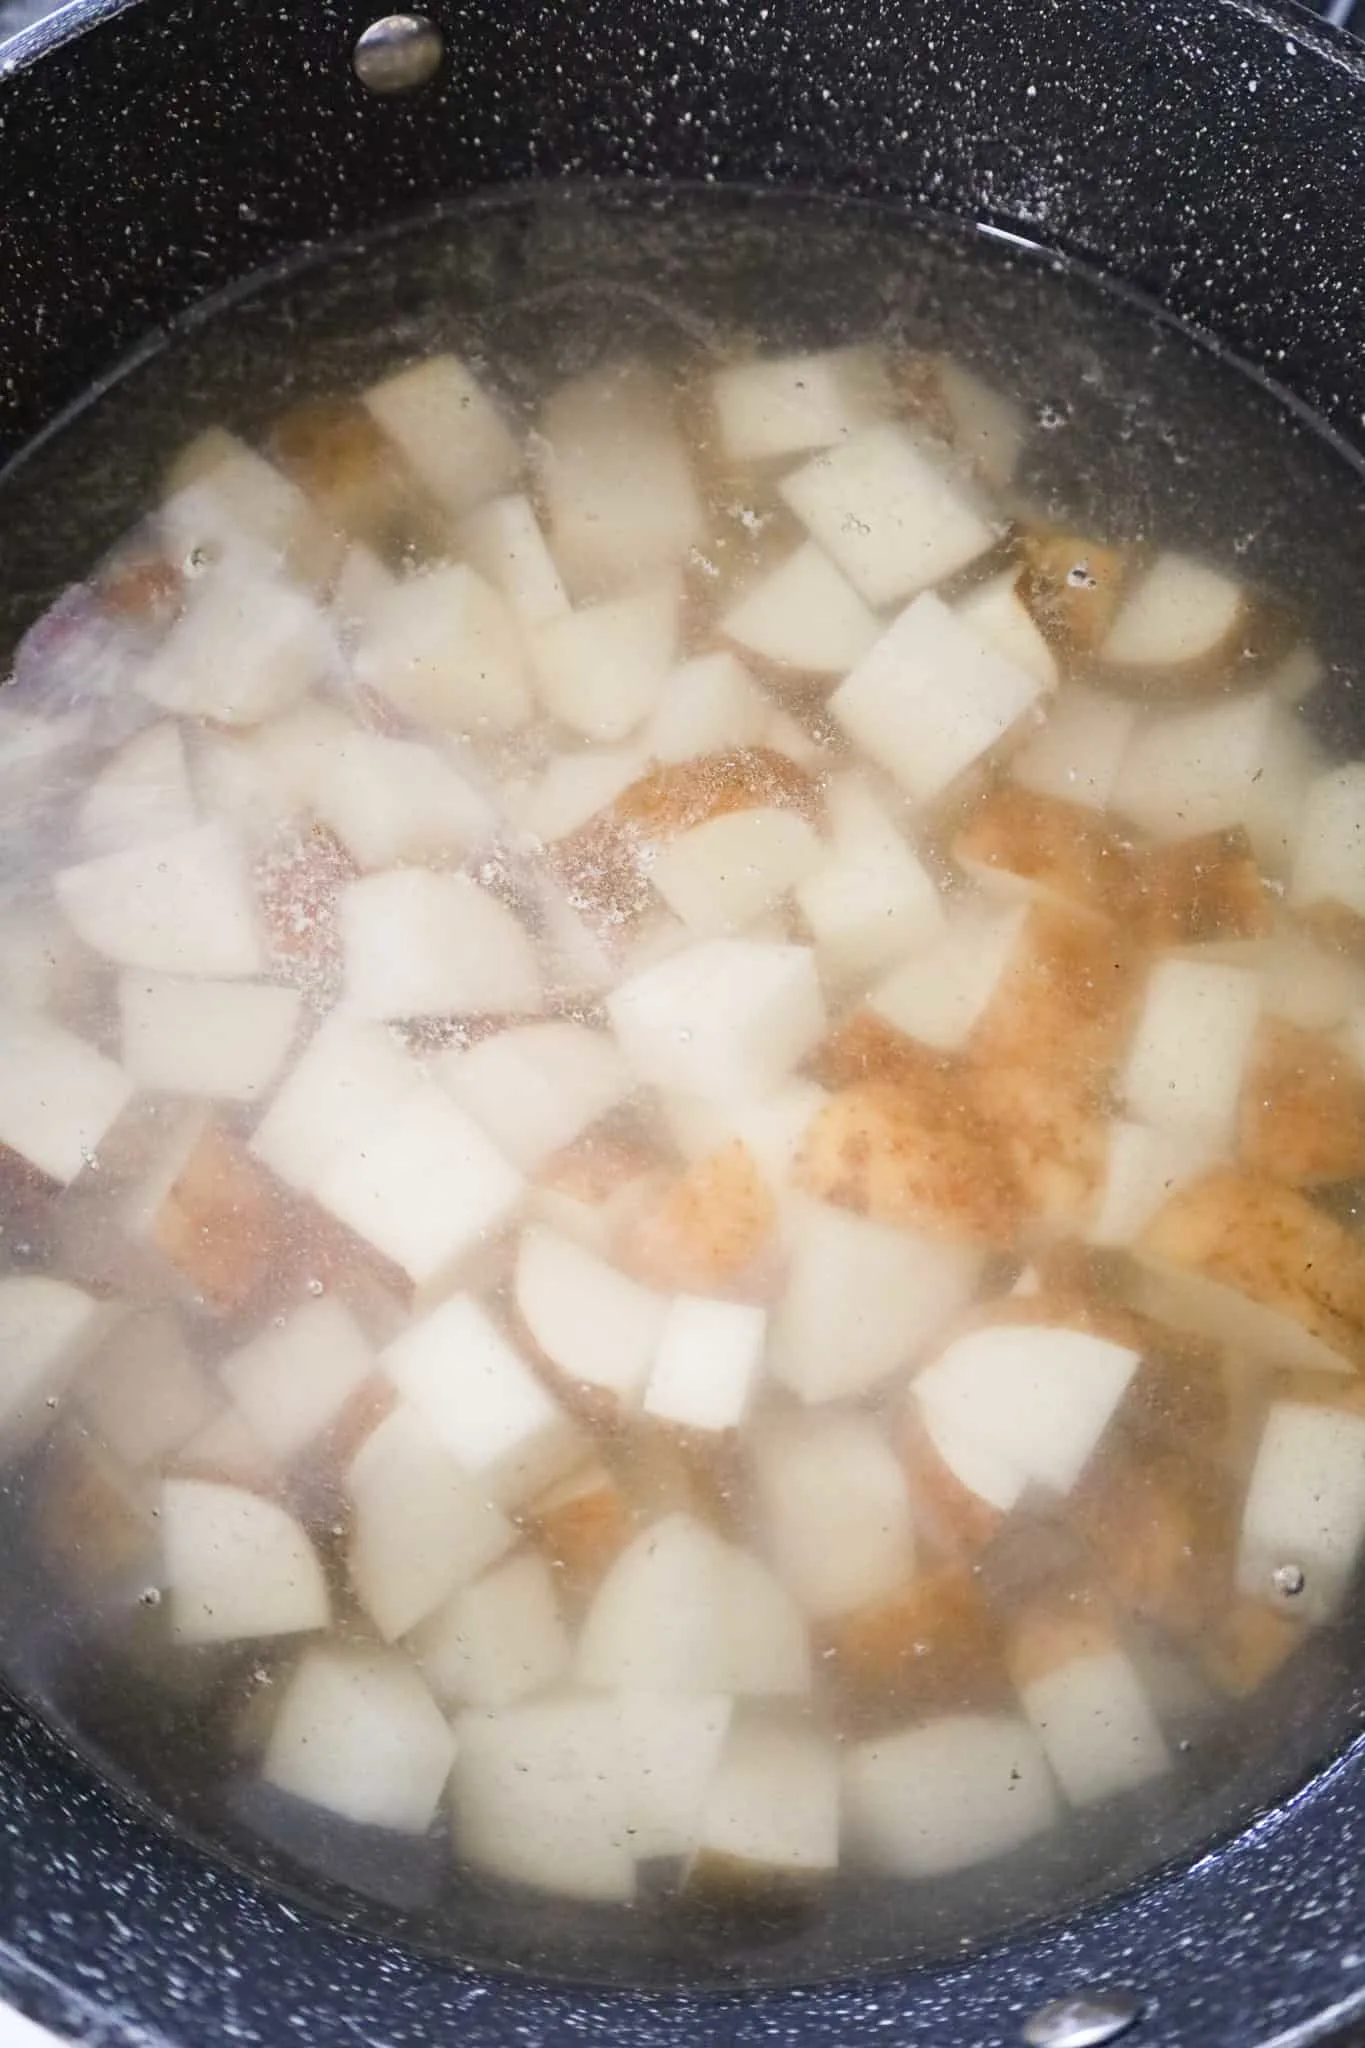 diced potatoes in a pot of water